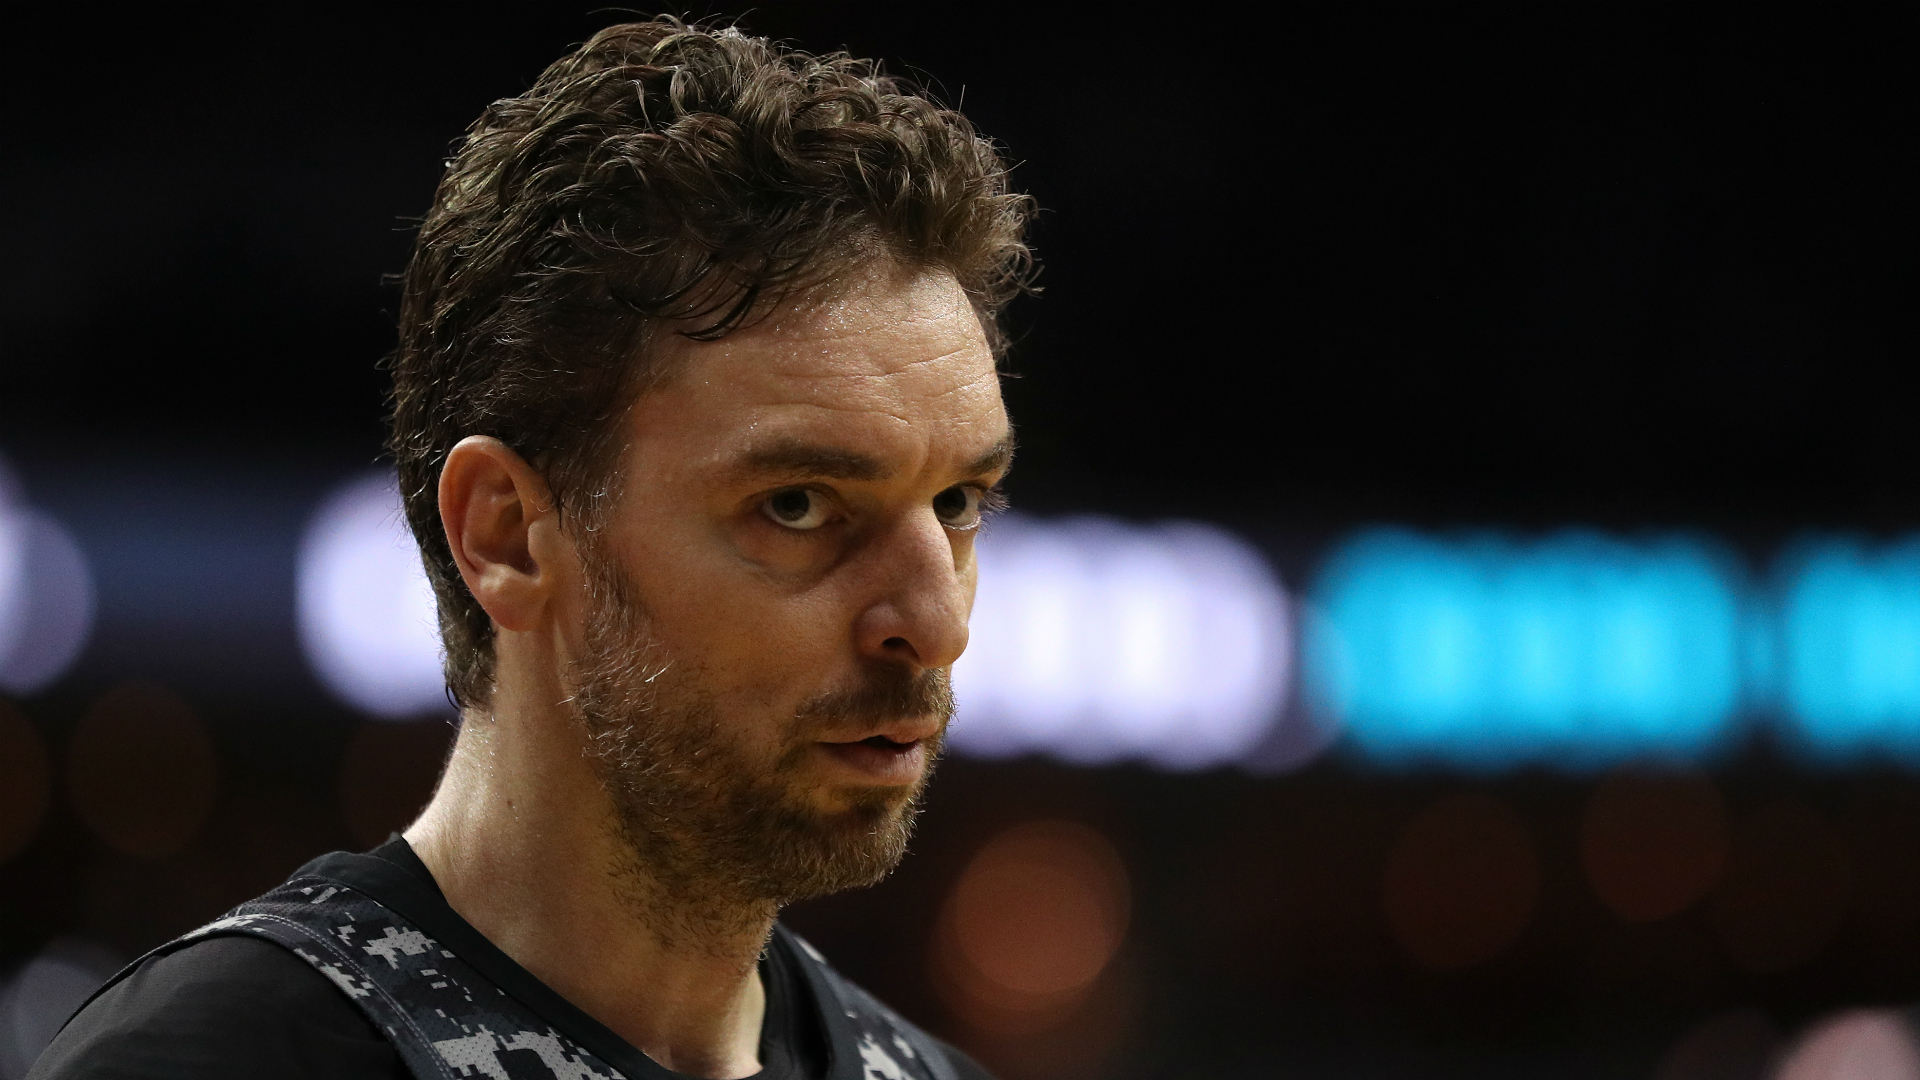 Pau Gasol joined the Portland Trail Blazers in July, however, the two-time NBA winner's rehab has taken longer than expected.